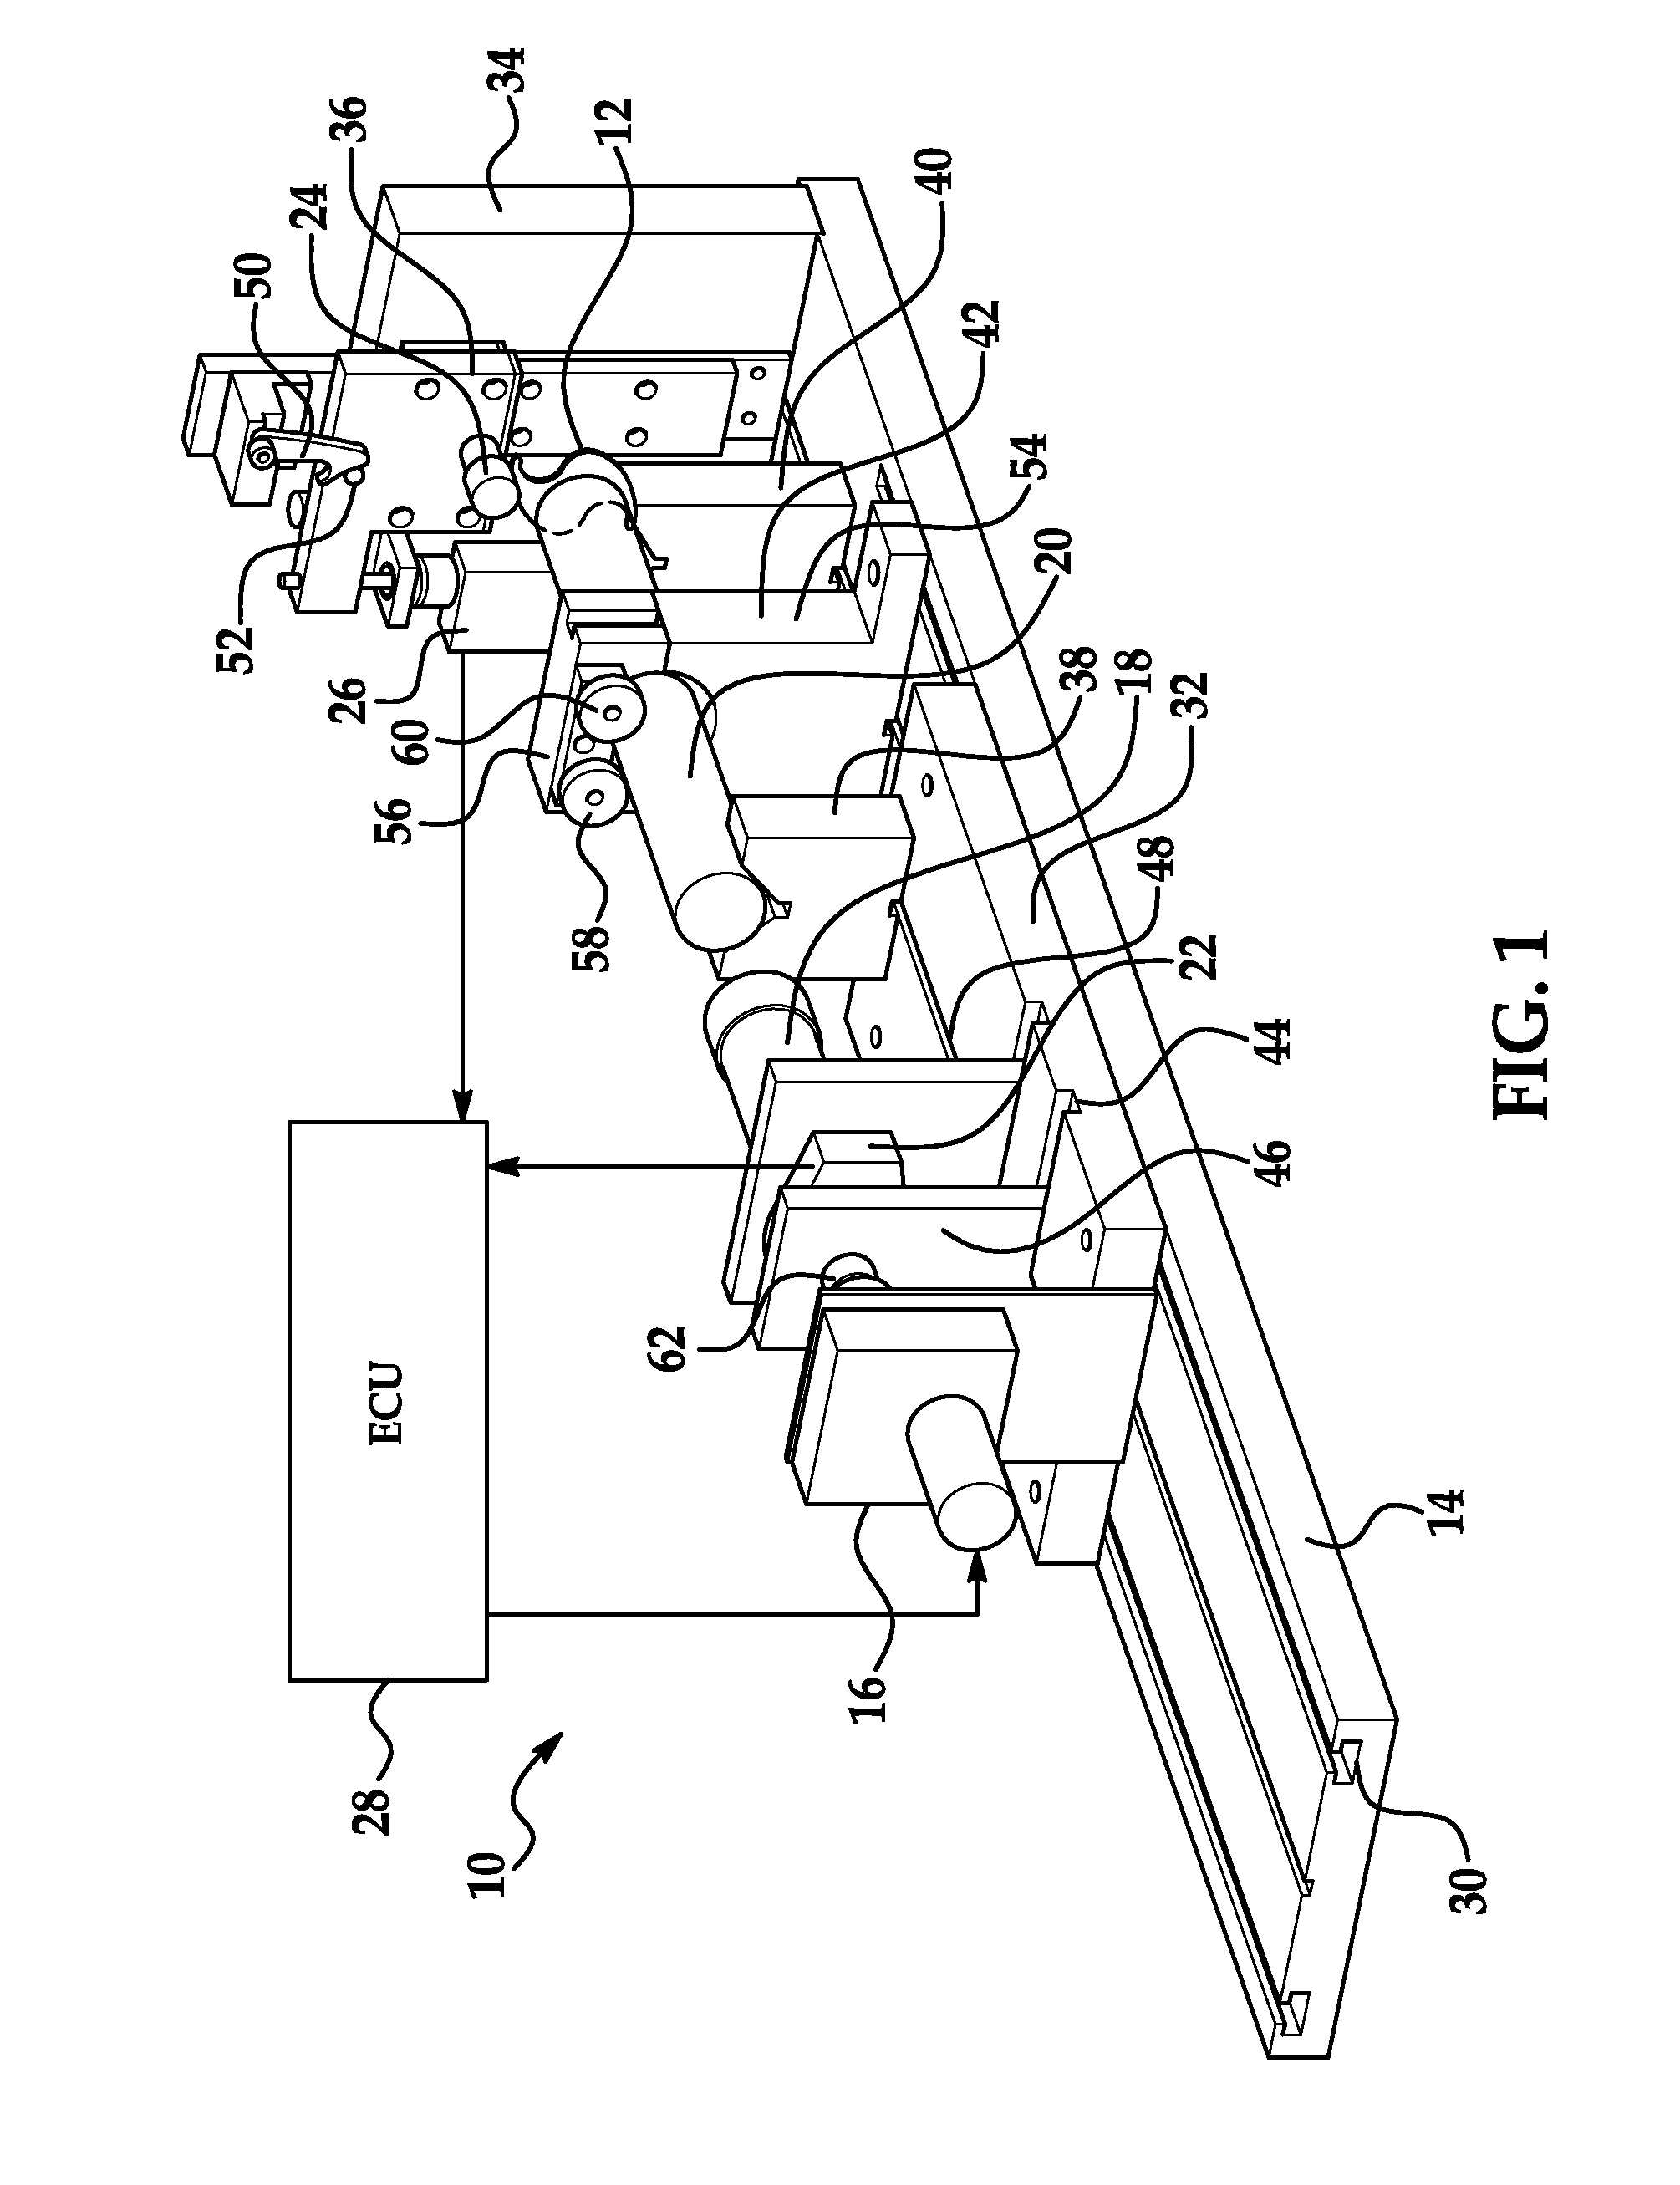 Method and System for Evaluating Characteristics of an S-cam